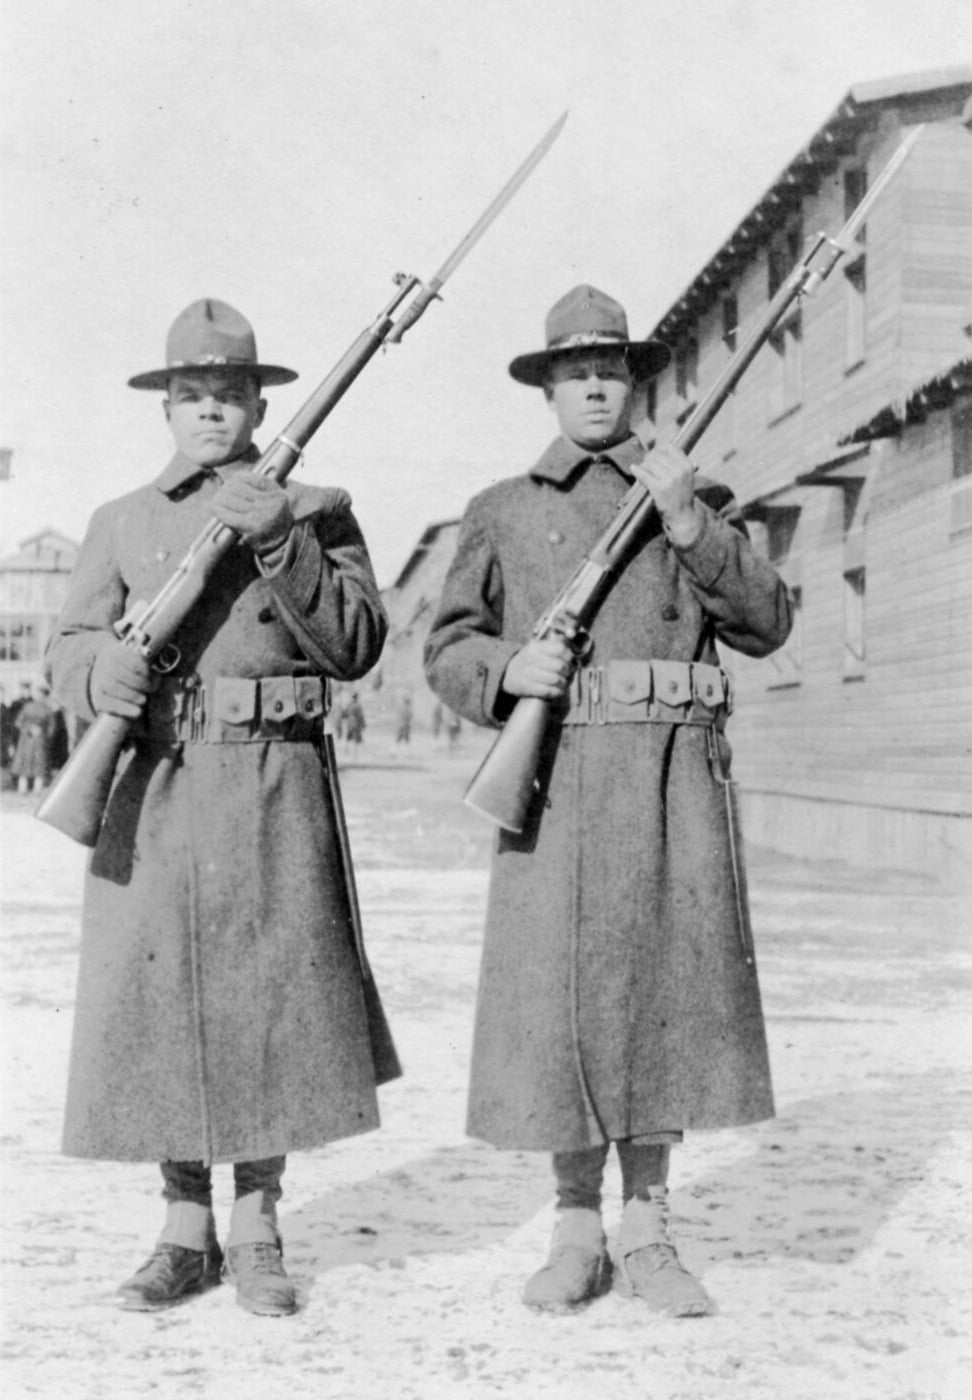 Two soldiers holding rifles